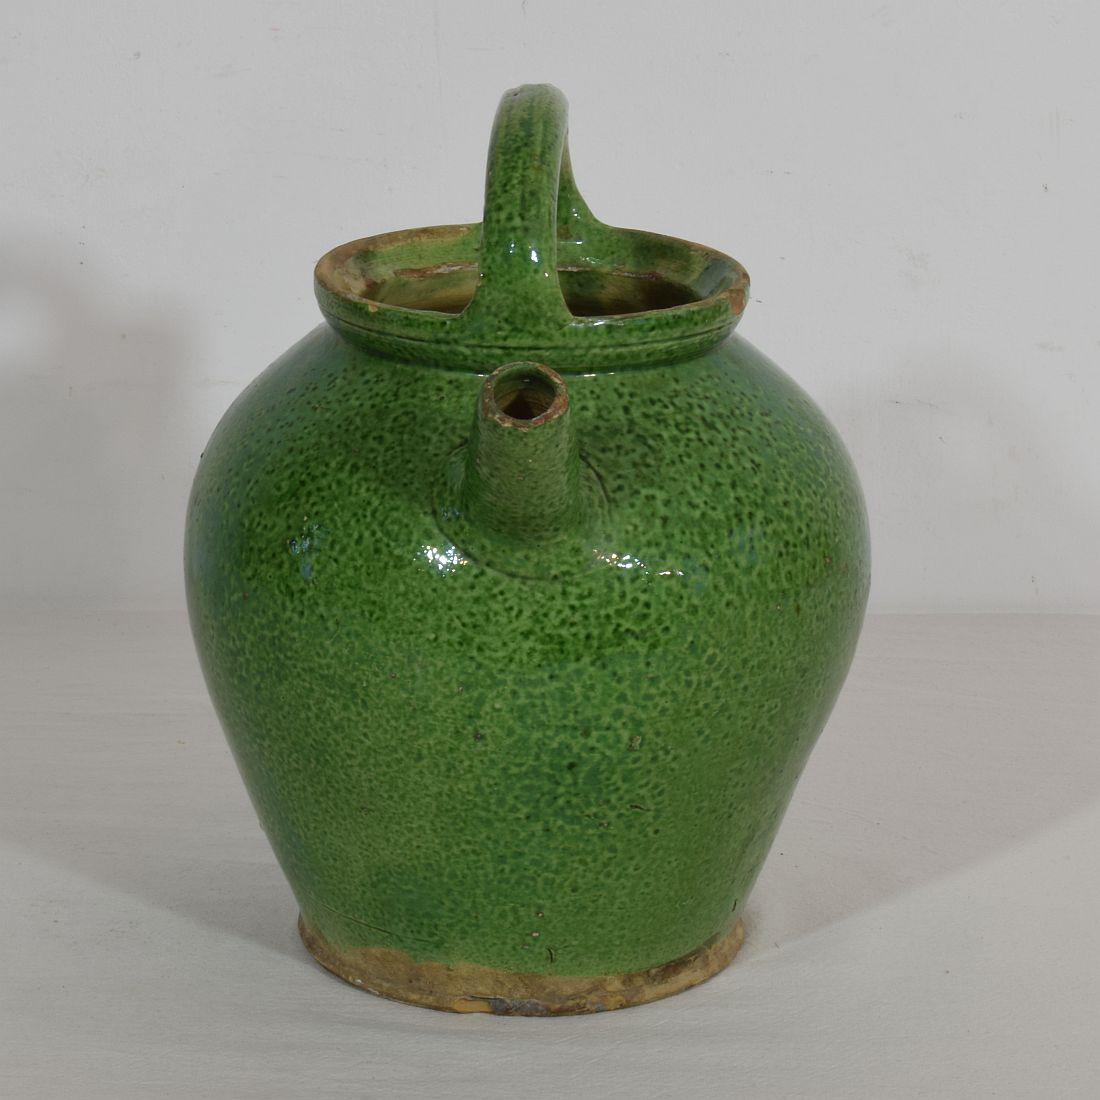 French Provincial 19th Century, French Green Glazed Terracotta Jug or Water Cruche